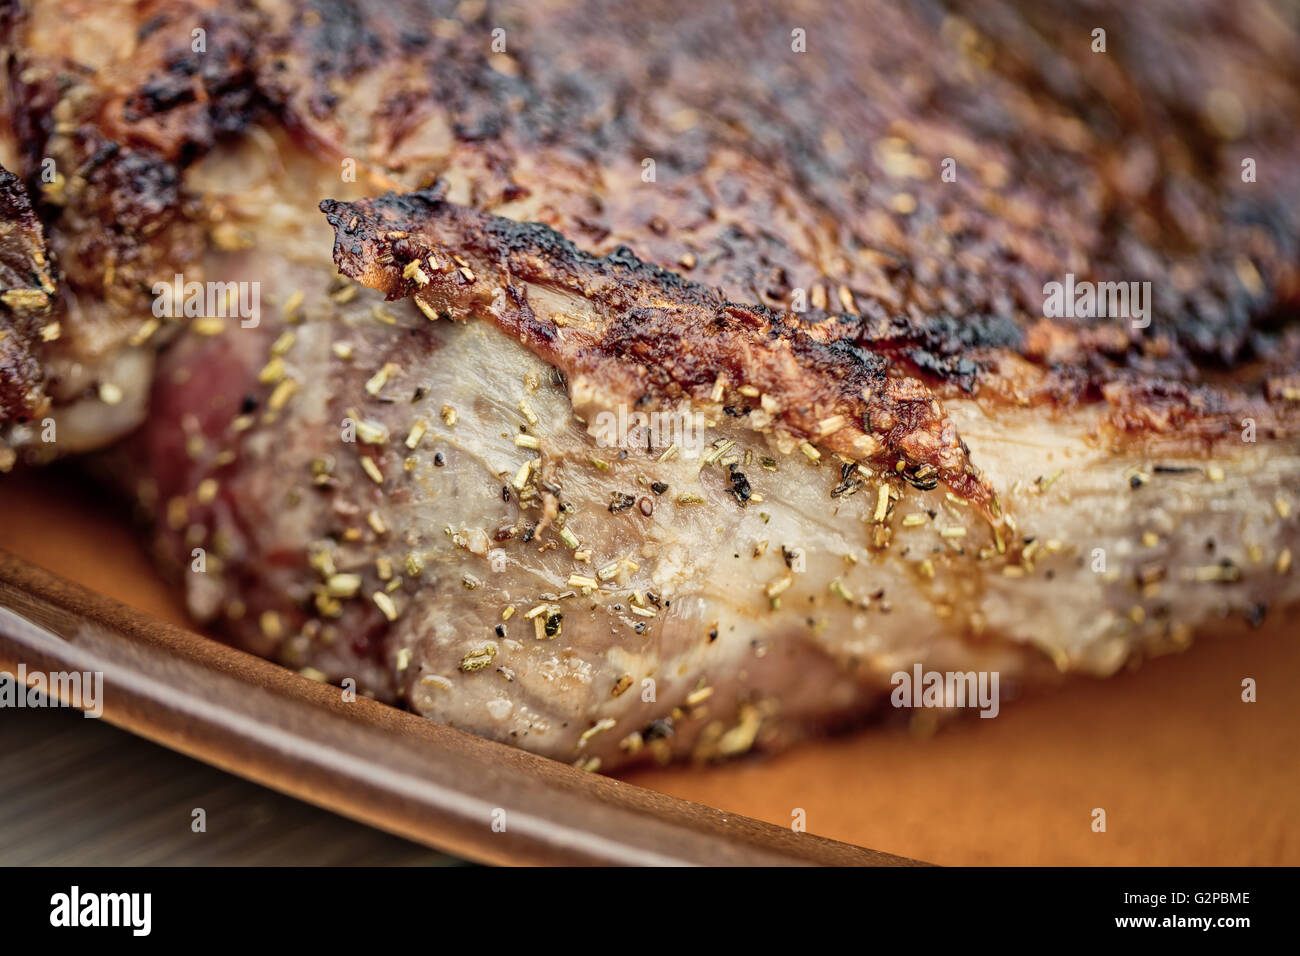 Grilled Beef Cutlet at the barbecue Cut into slices for serving Stock Photo